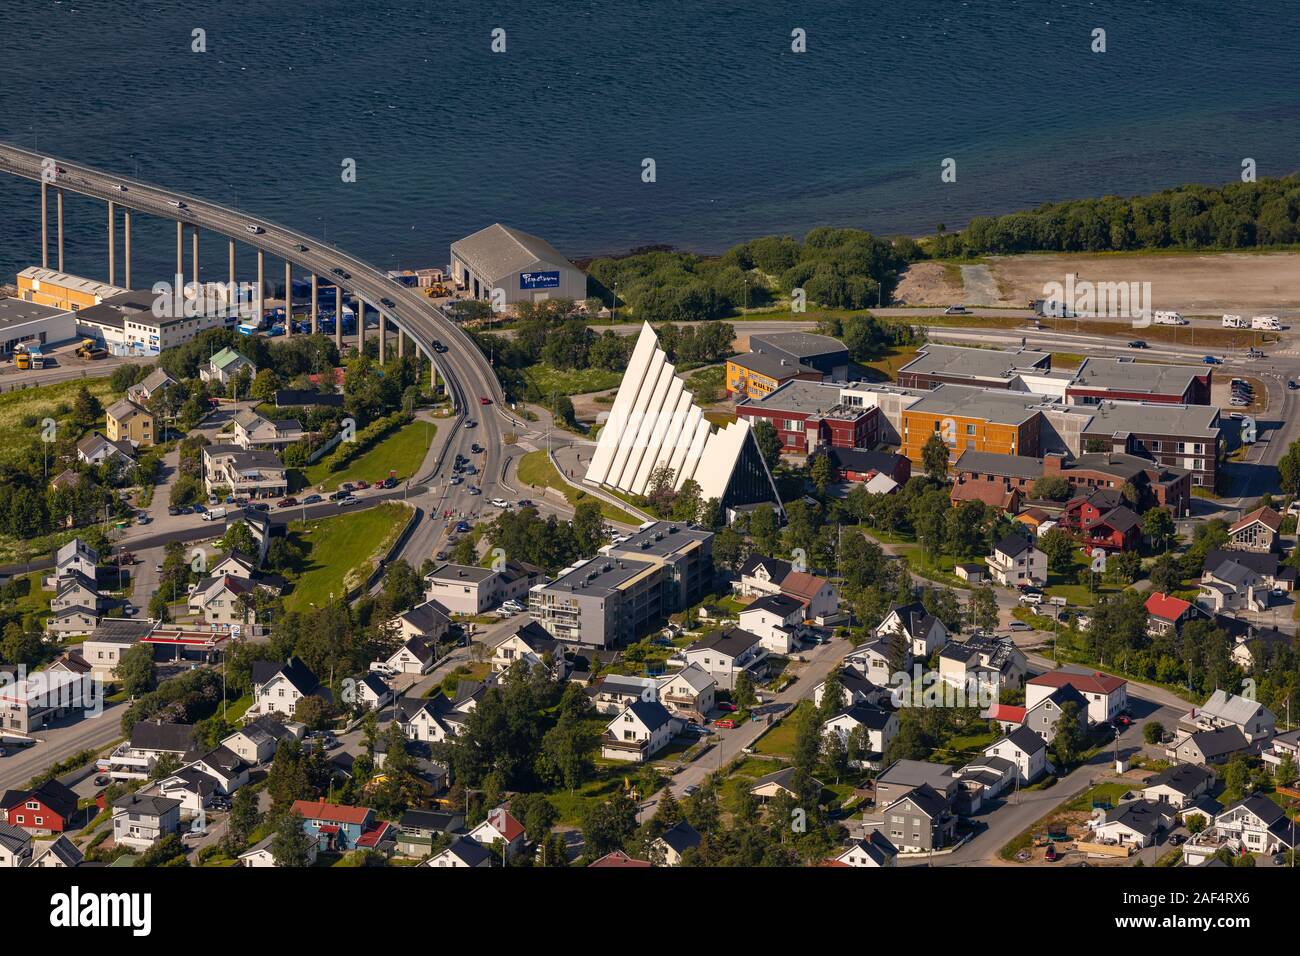 TROMSØ, NORWAY - Tromsdalen Church, or Arctic Cathedral, a modern concrete and metal church, architect Jan Inge Hovig. Stock Photo